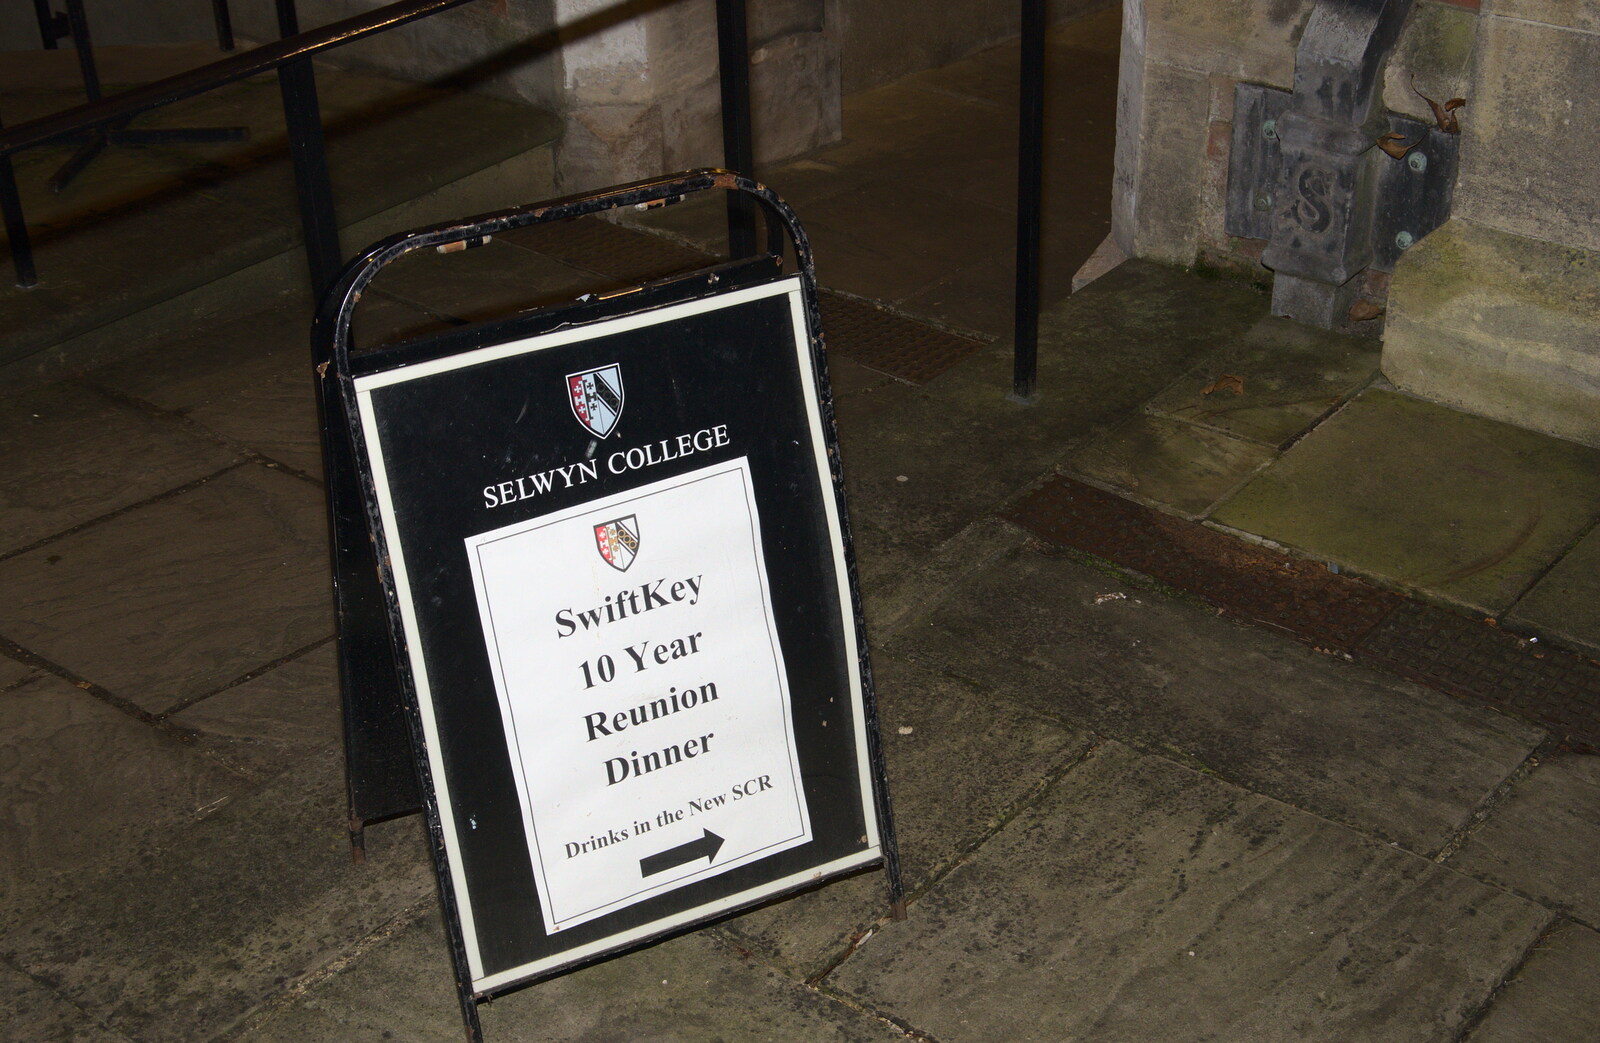 The sign for the reunion from SwiftKey's Ten Year Anniversary Reunion, Selwyn College, Cambridge - 11th January 2019